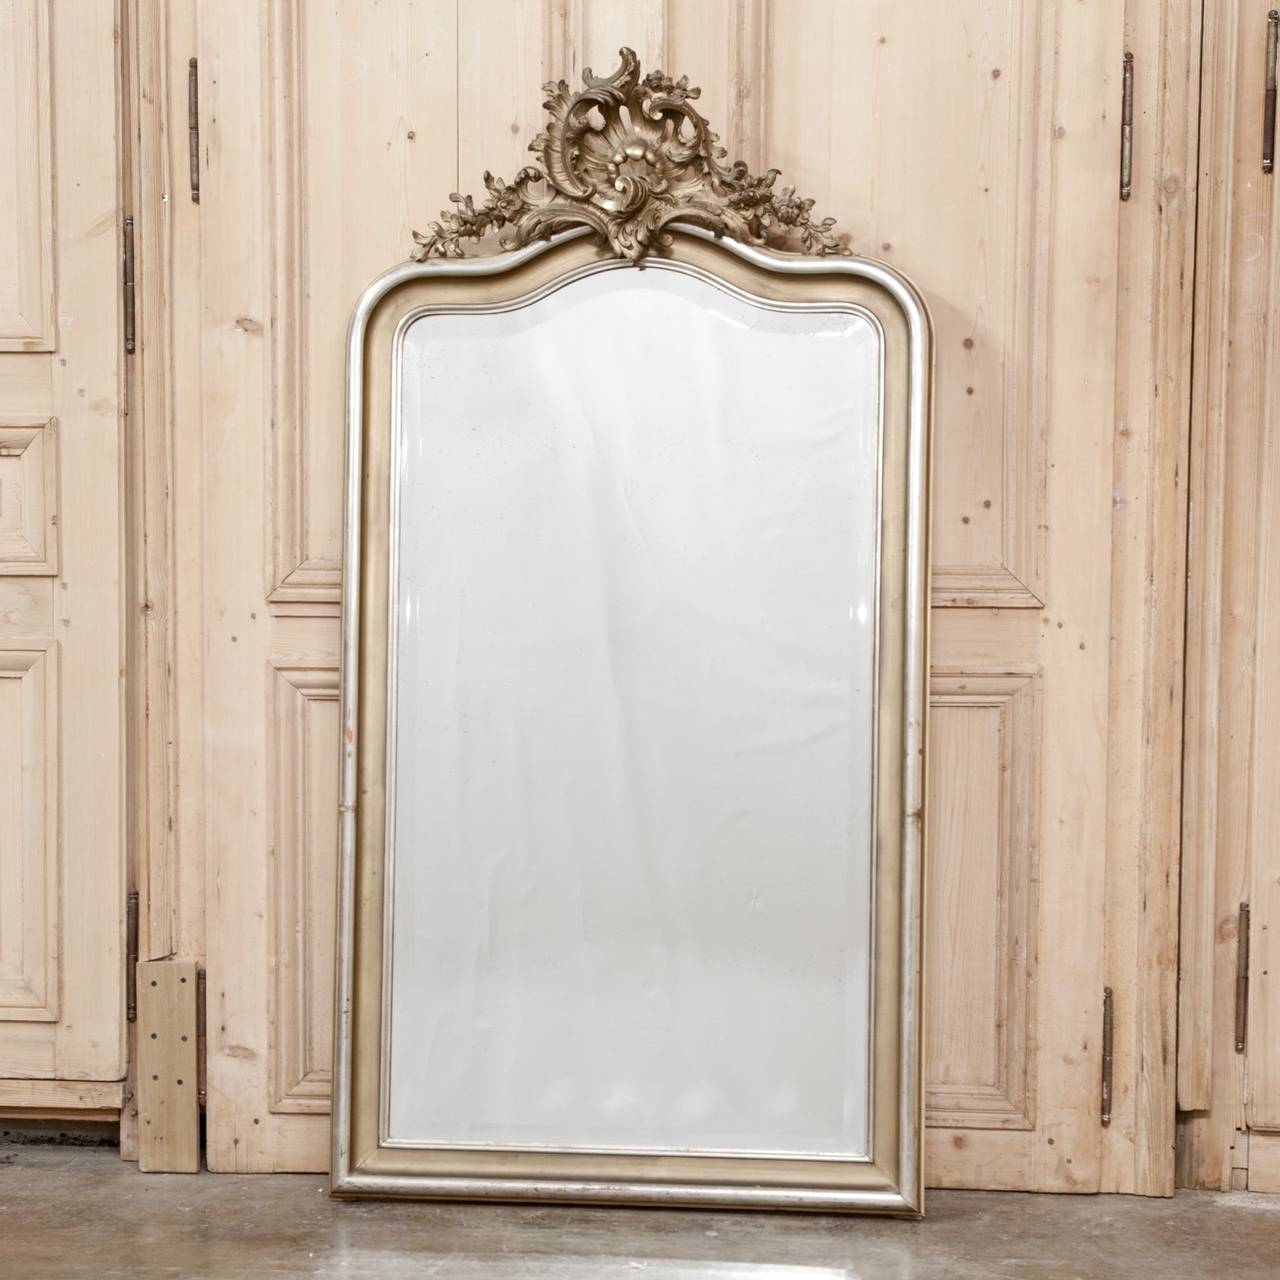 19th Century French Rococo Giltwood Mirror with Silver Leaf at 1stdibs